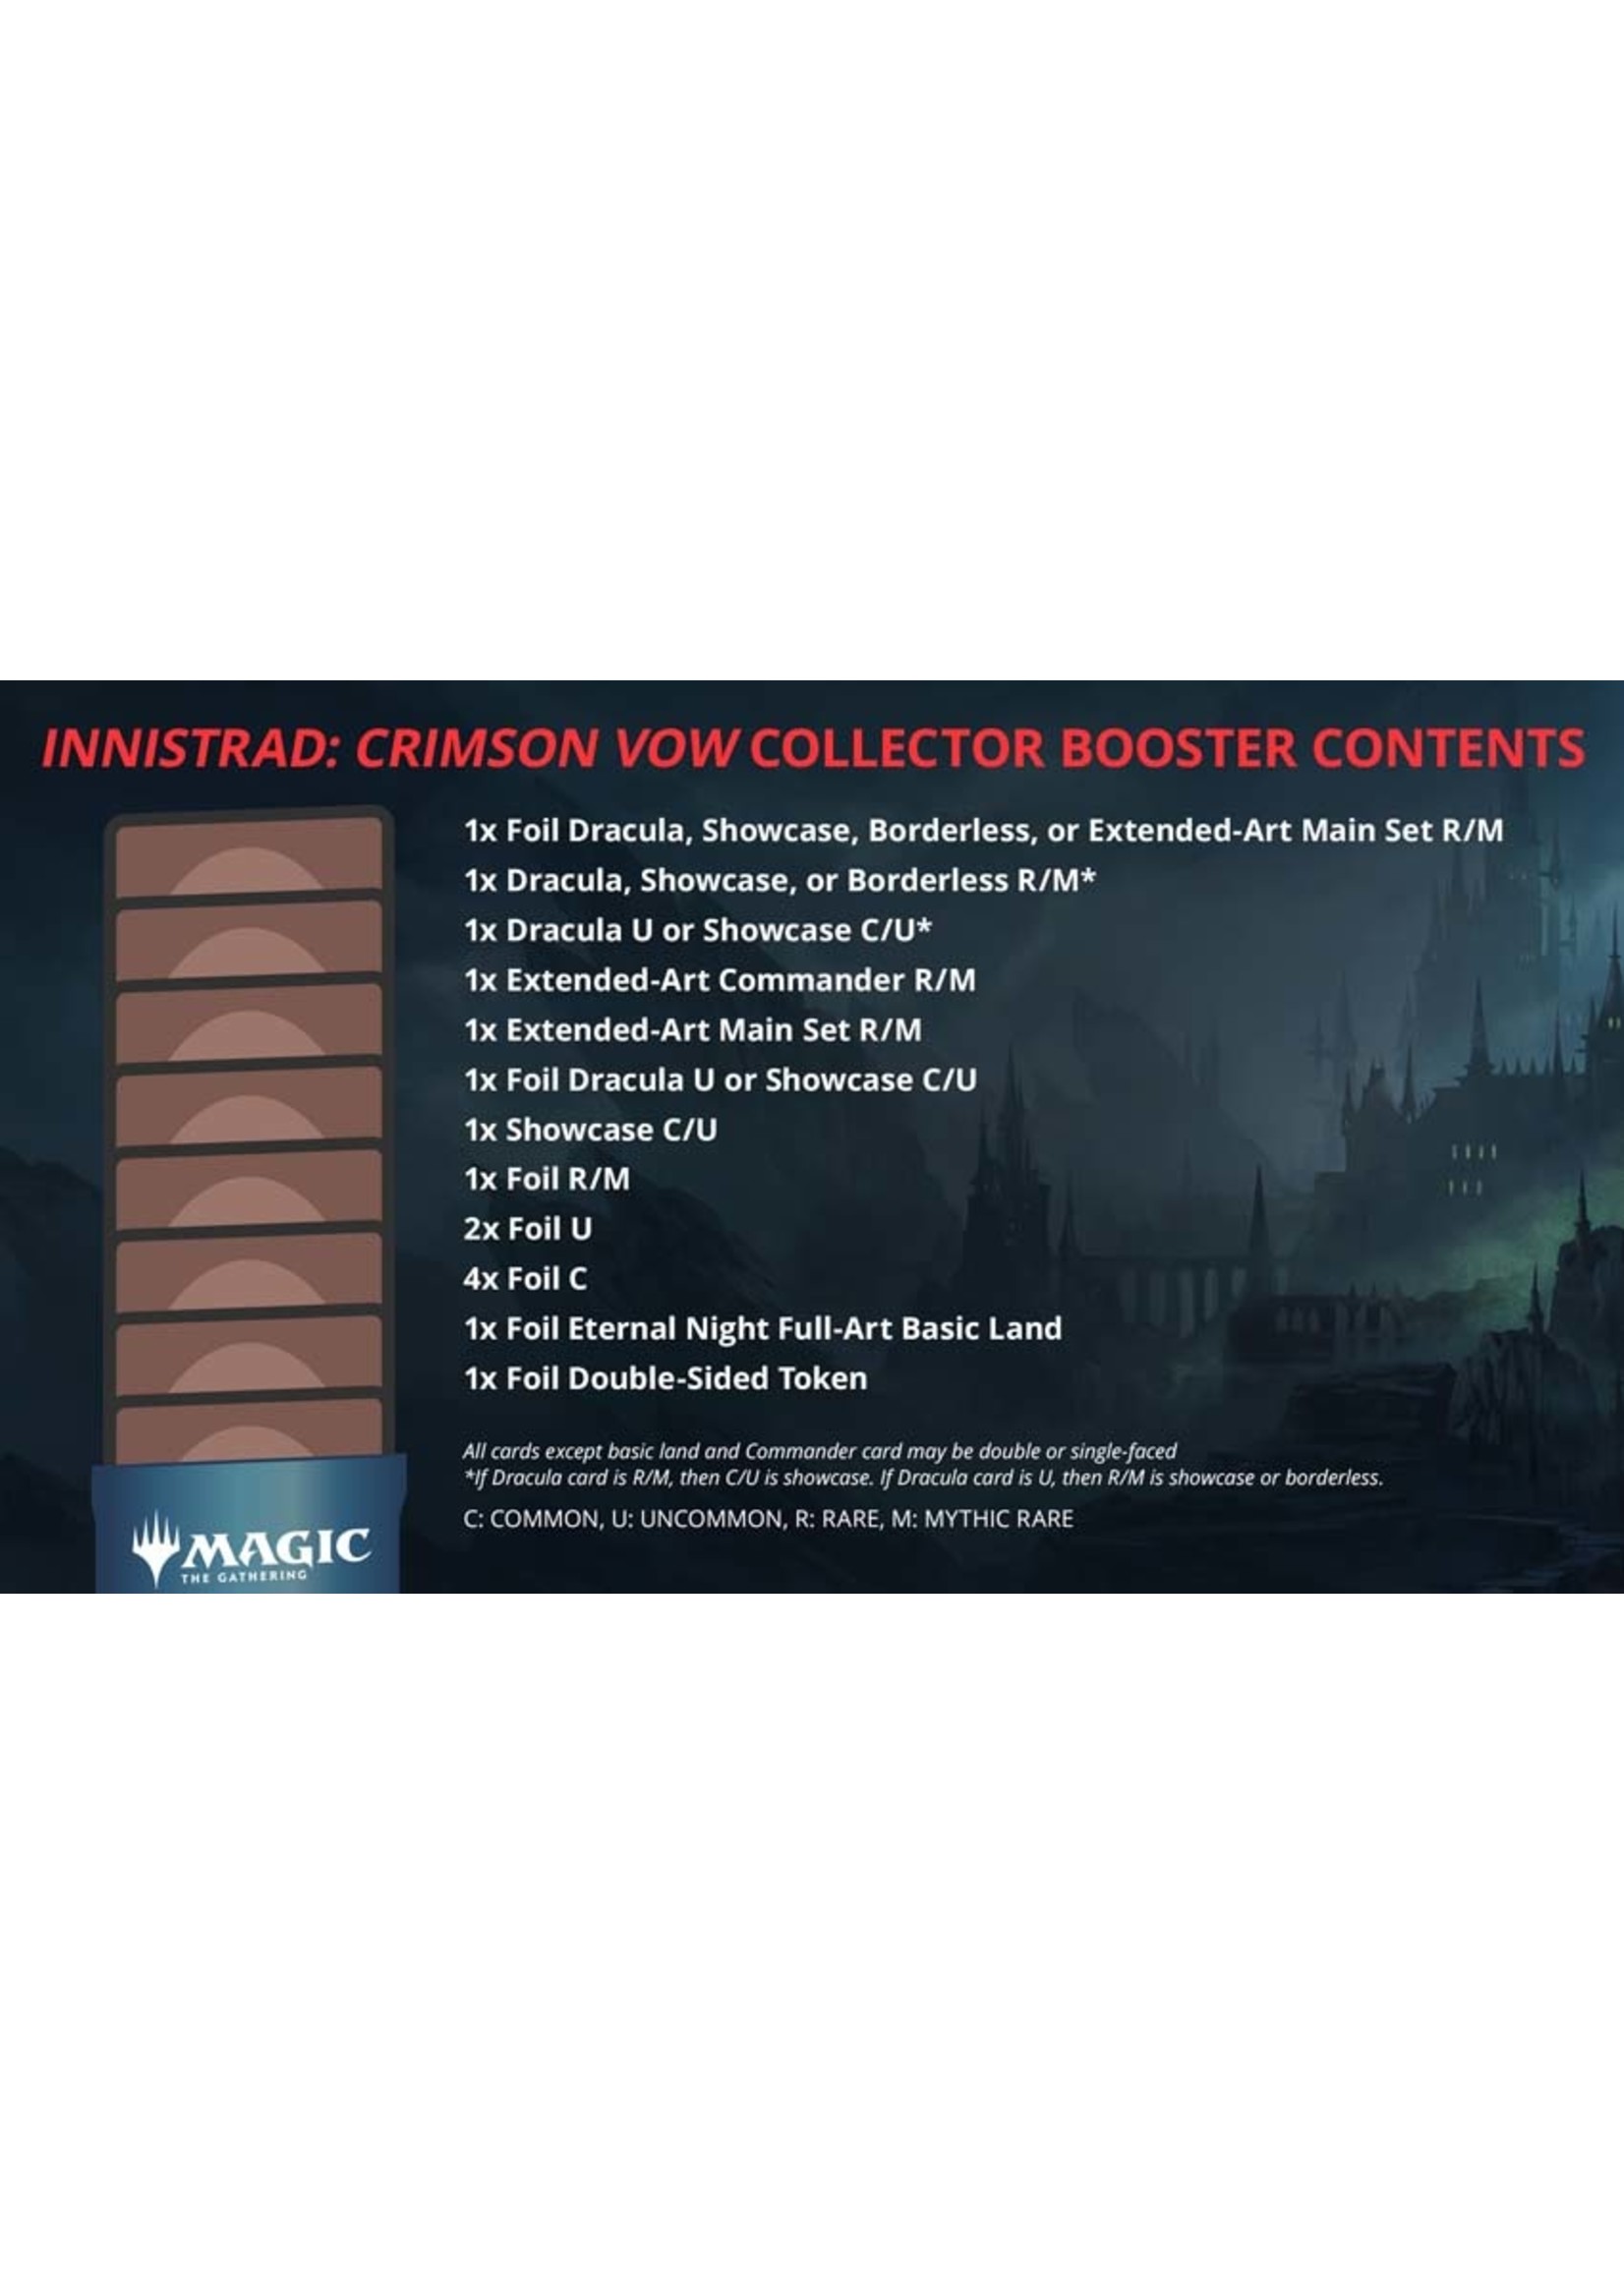 Magic: The Gathering MtG: Innistrad Crimson Vow Collector Booster Display (12) - sale